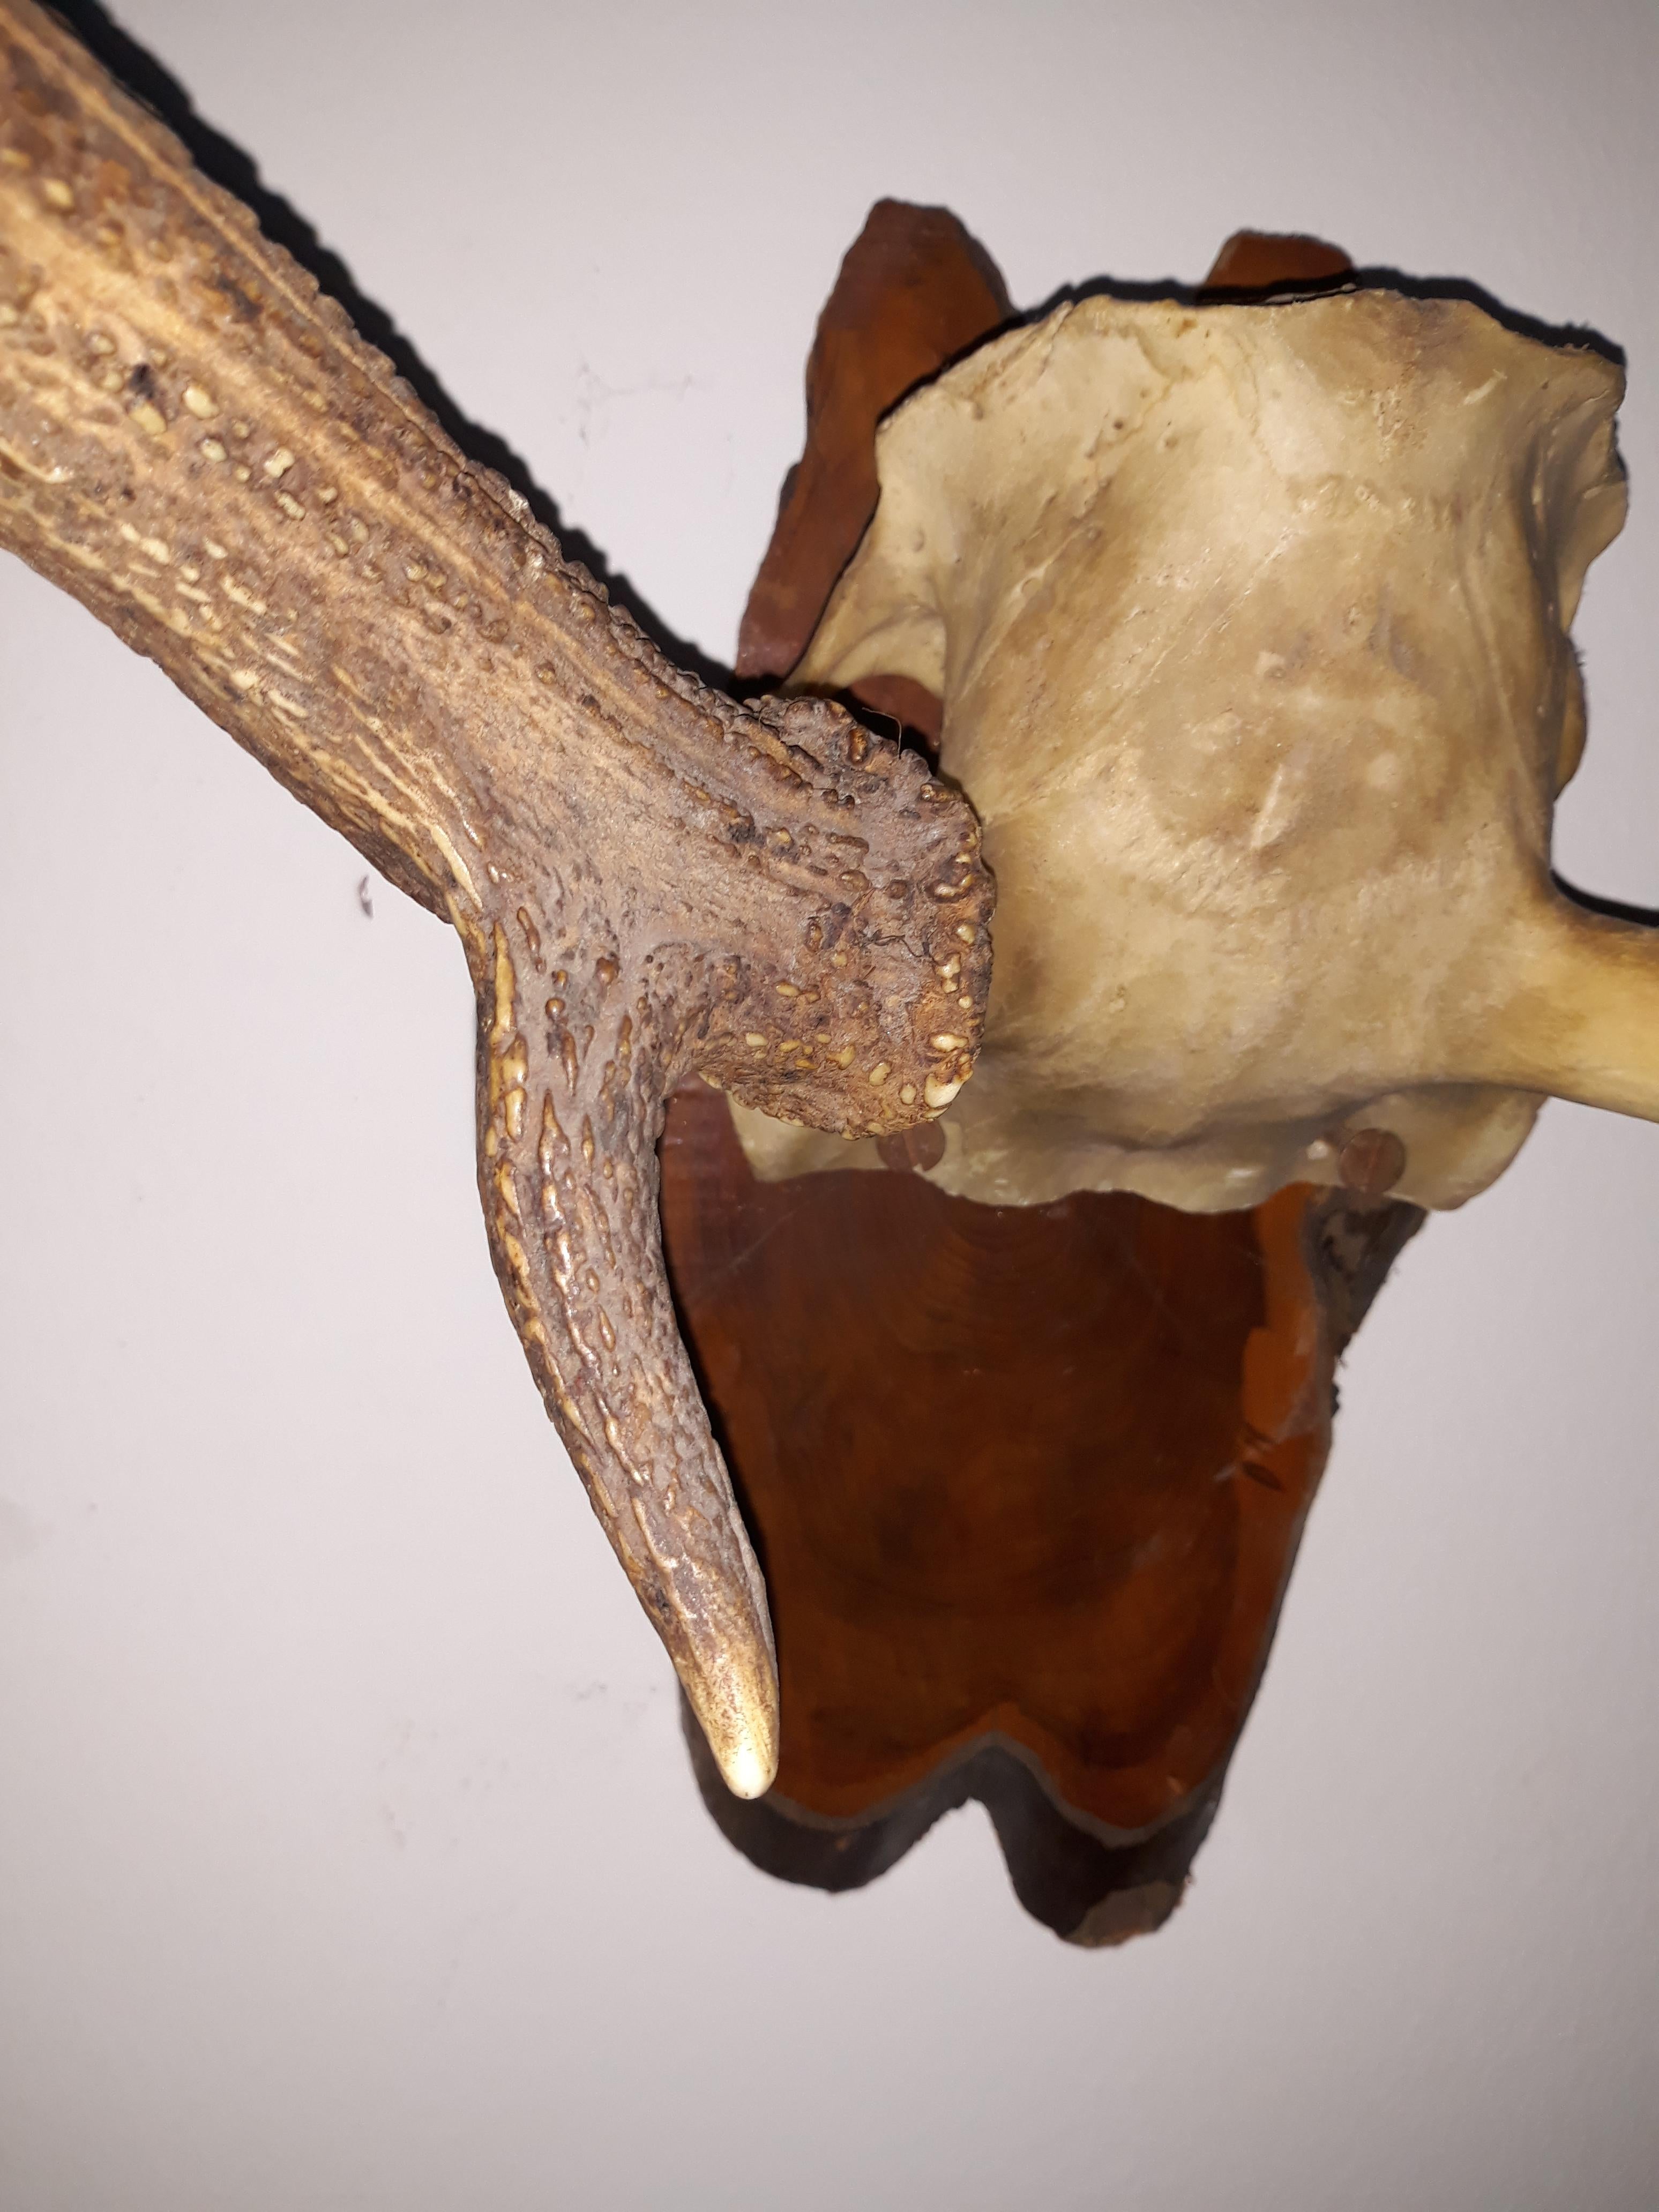 Pair of Early Deer Antler Mount On Black Forest Wood Plaque, Dated 1973 For Sale 4